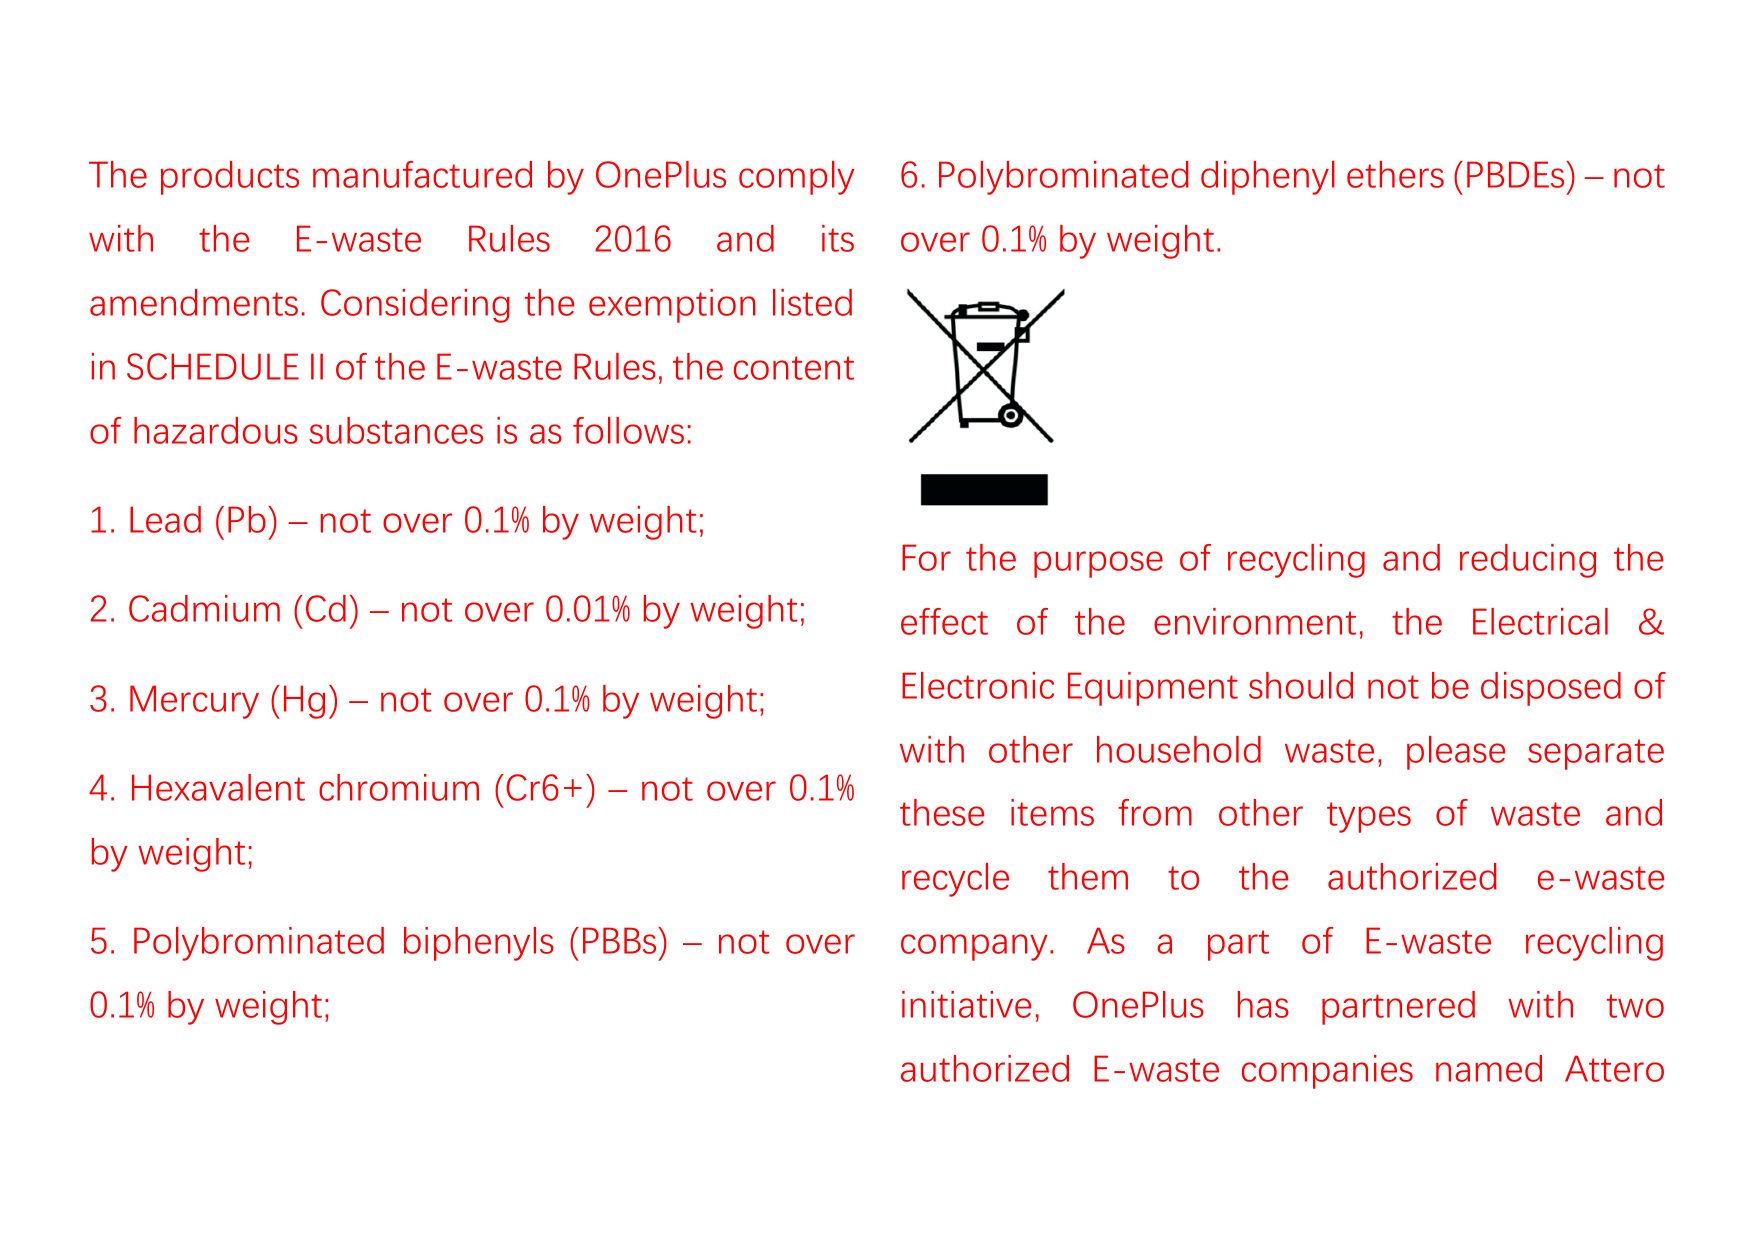 The products manufactured by OnePlus comply6. Polybrominated diphenyl ethers (PBDEs) – notwithover 0.1% by weight.theE-wasteRule